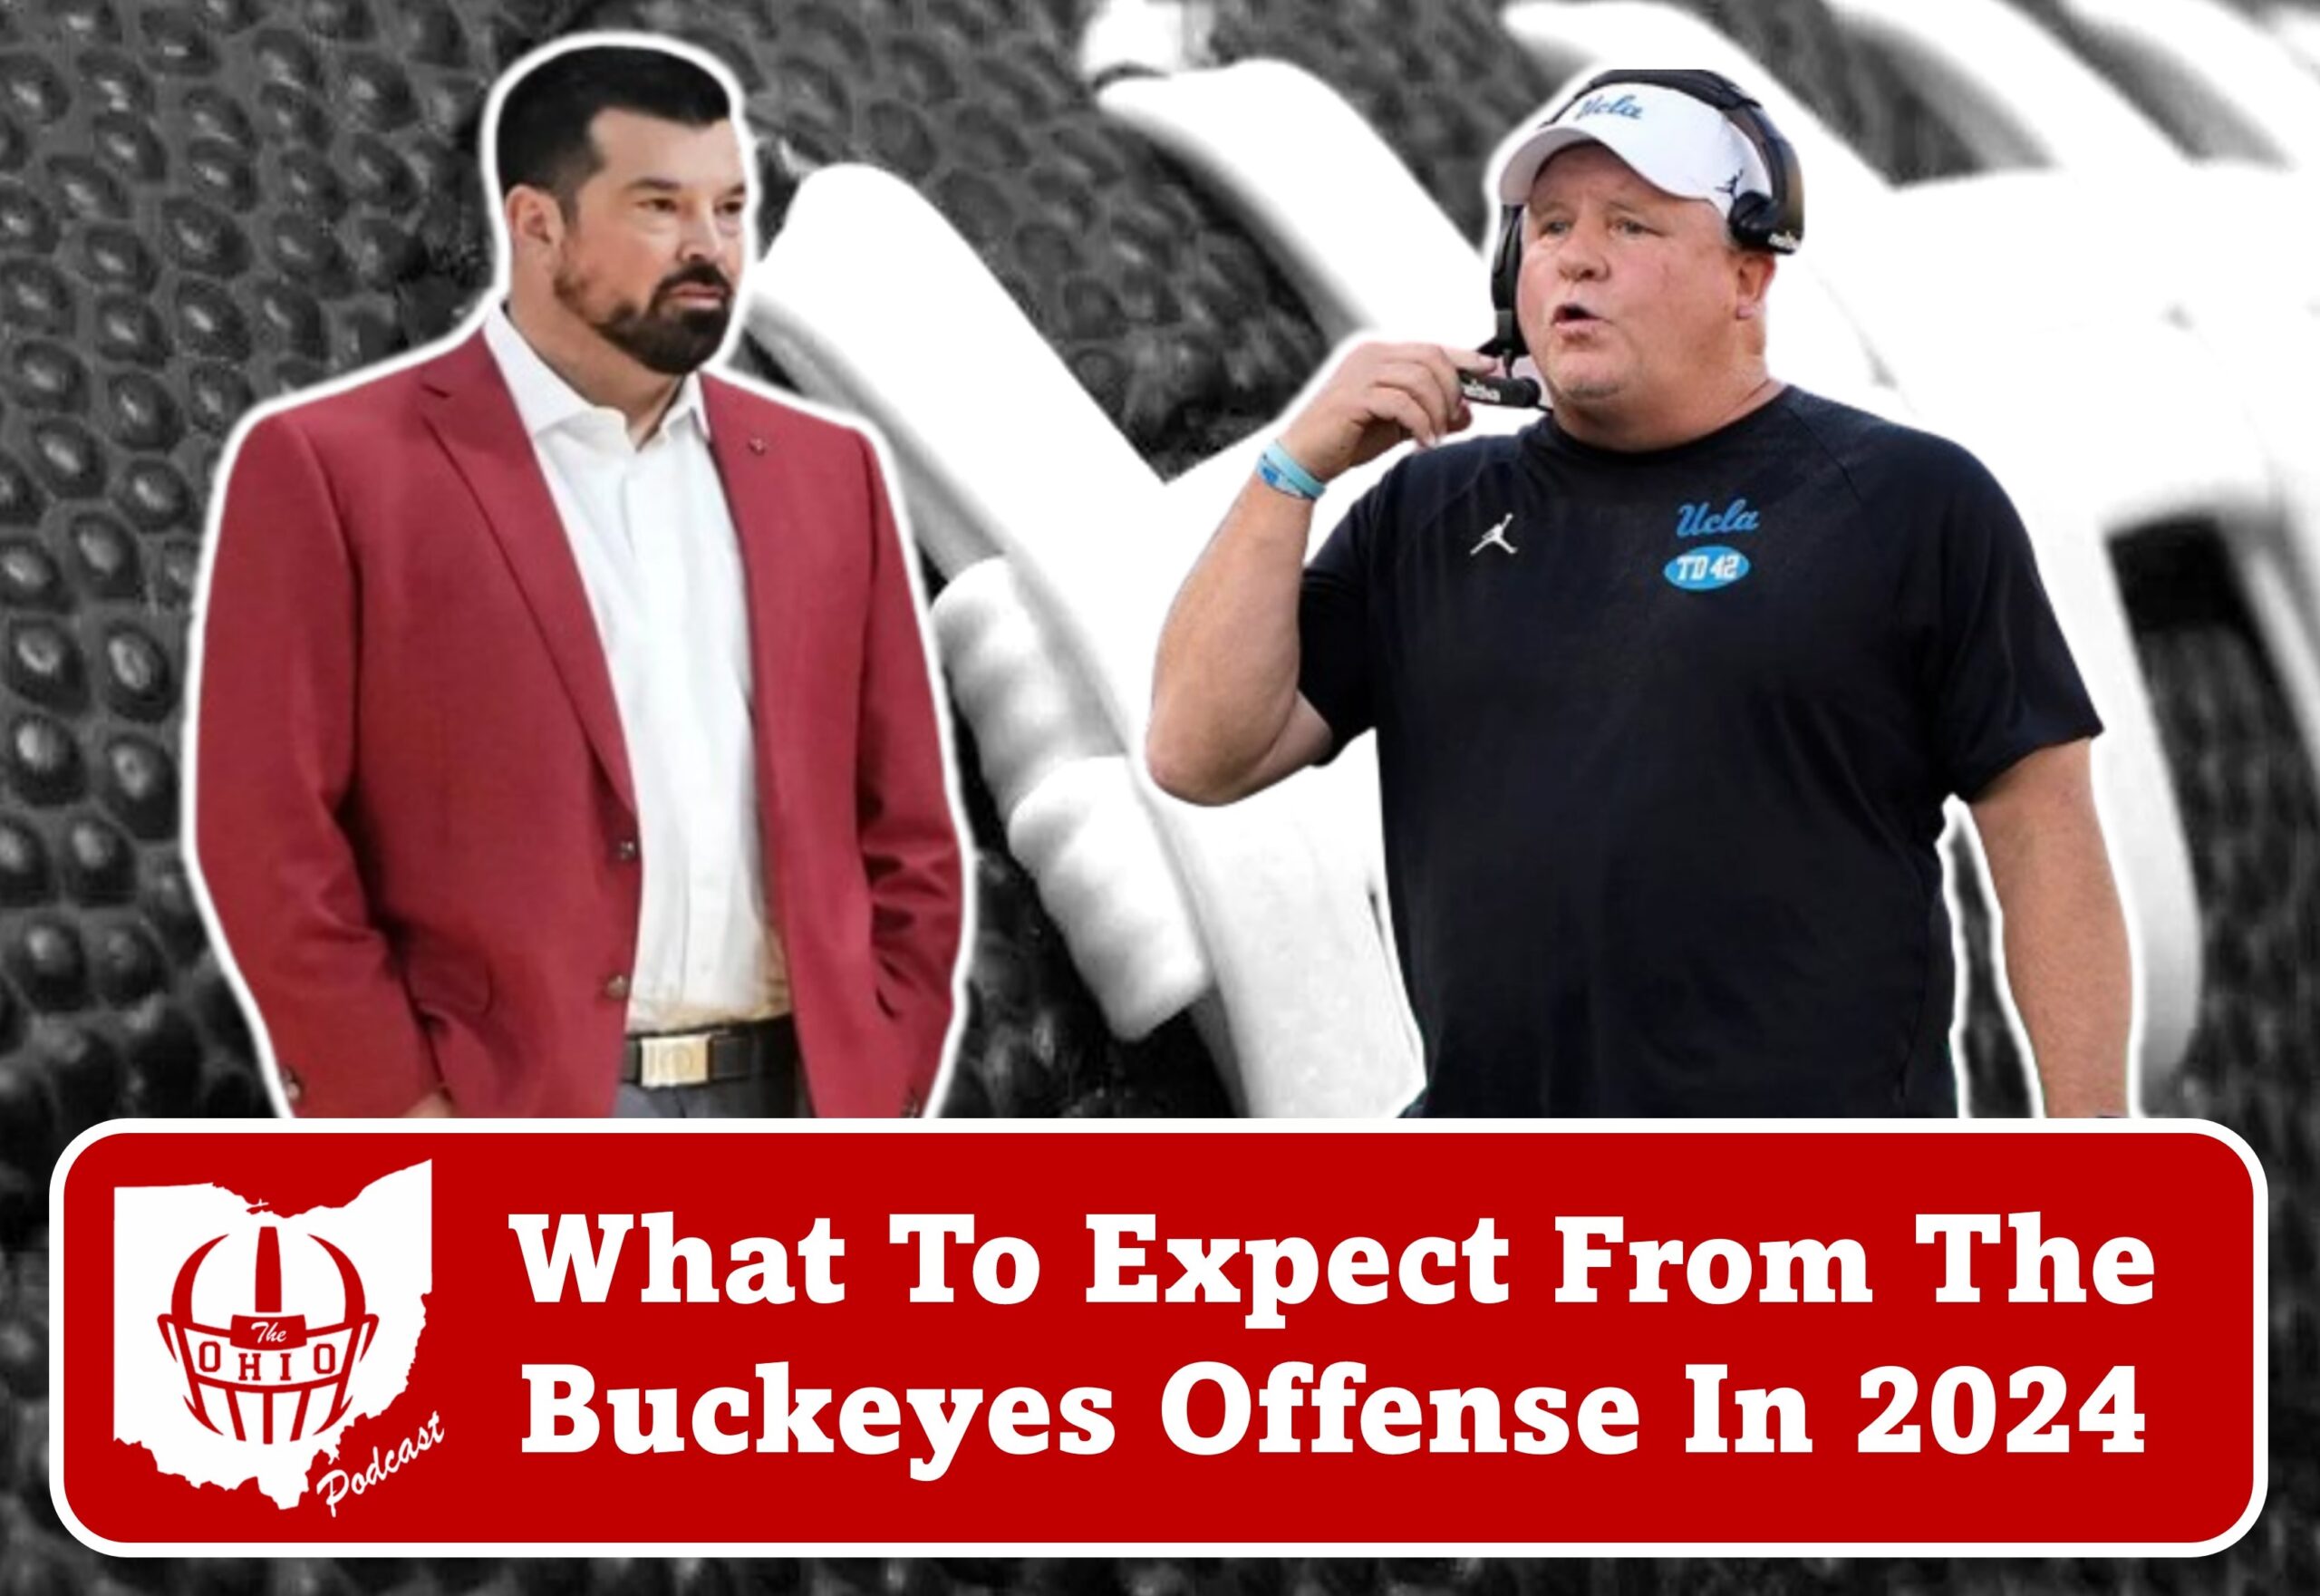 What To Expect From The Buckeyes Offense In 2024?